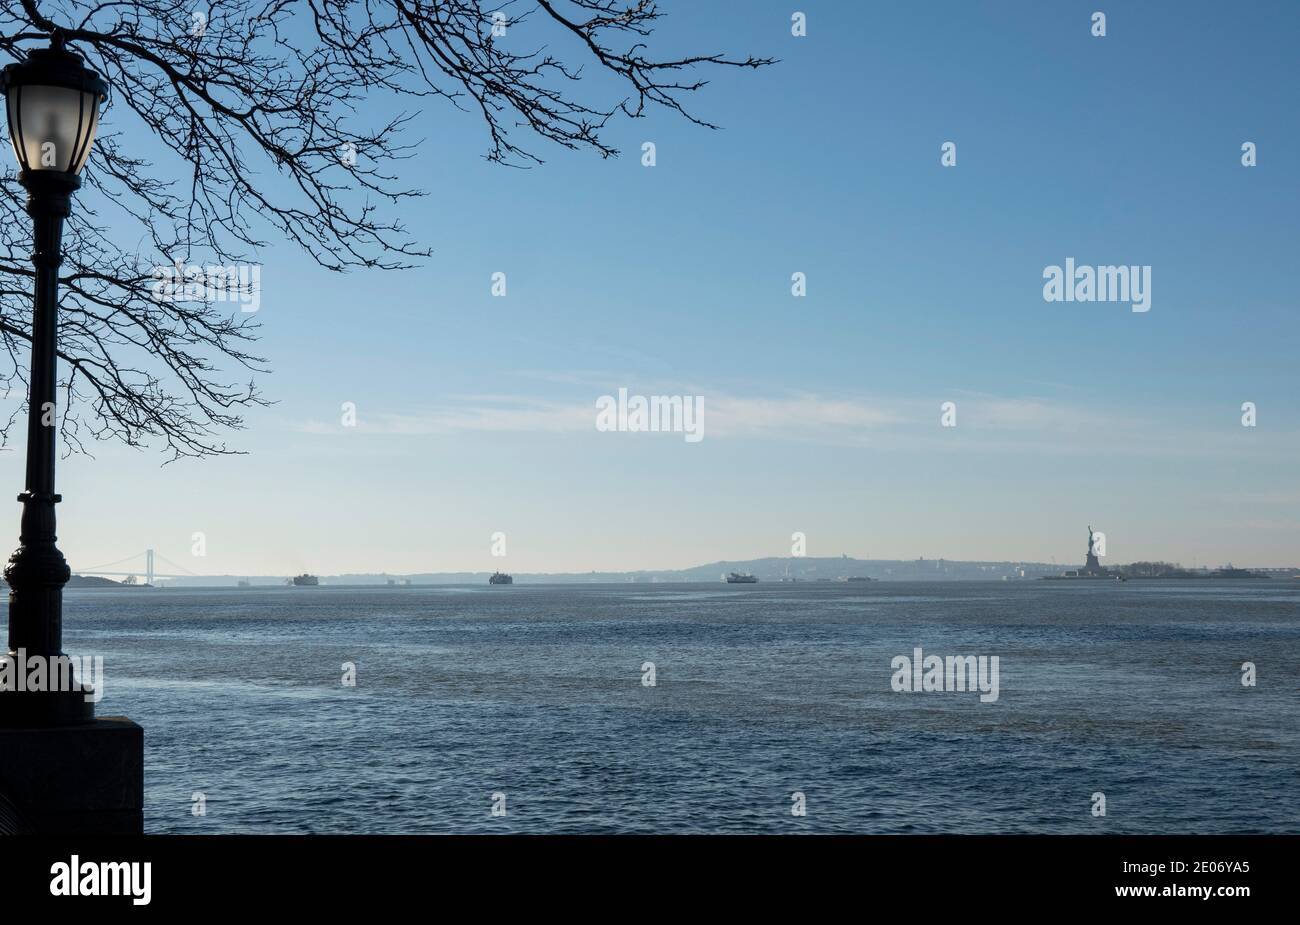 New York, USA, December 2020. Landscape view during winter towards New York Harbor and Staten Island from Downtown Manhattan. Stock Photo